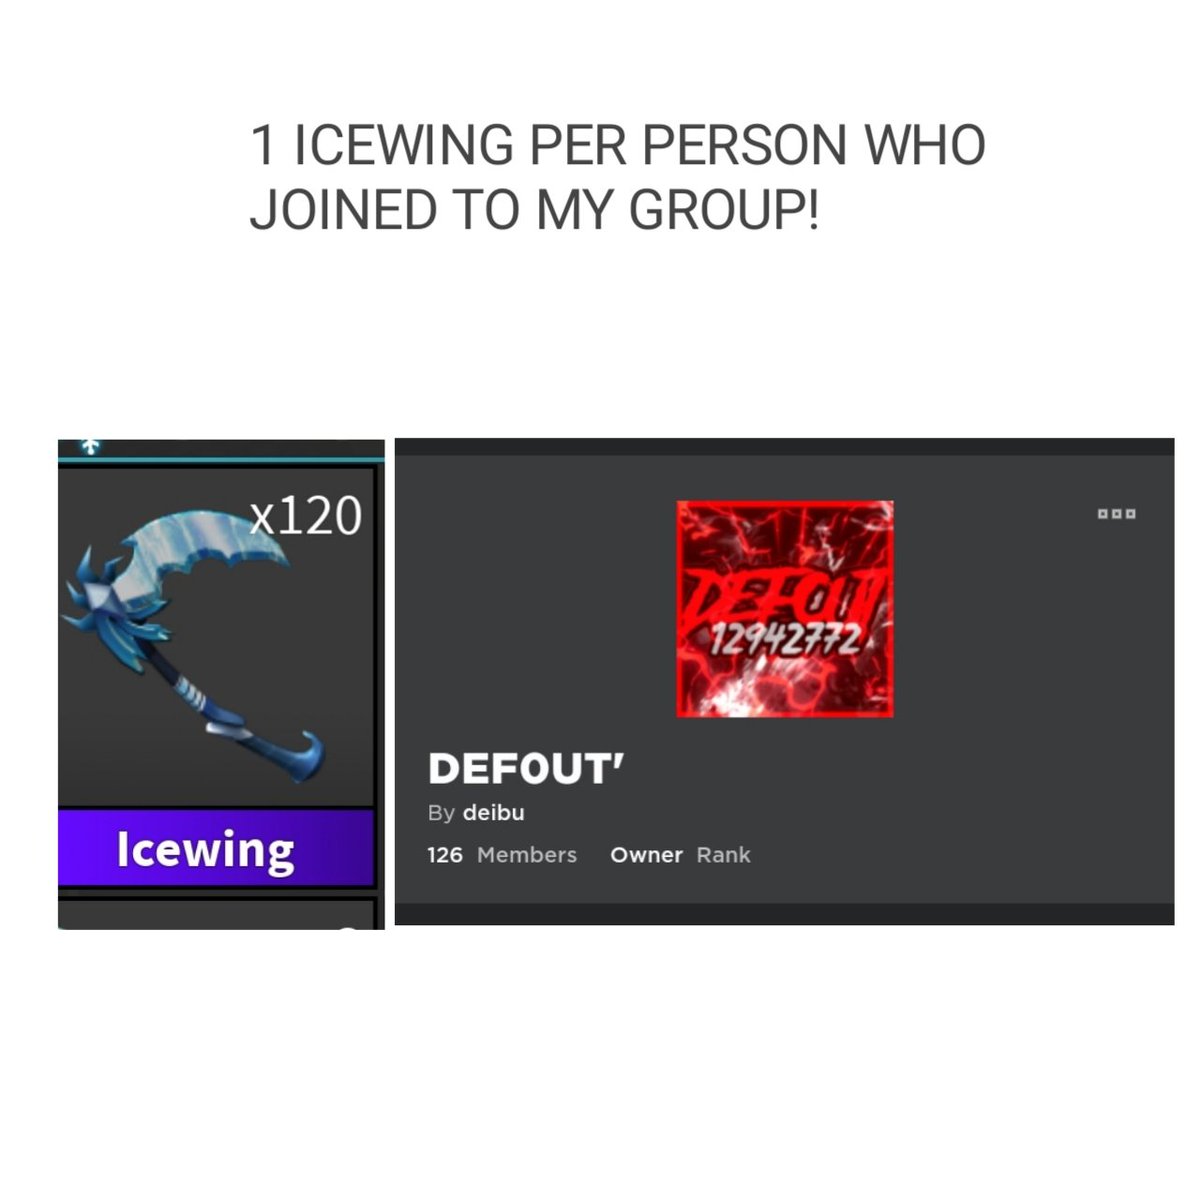 since im quiting mm2 ima giving away icewing just join to my group
Note: 1 icewing per player who join!
Drop a screenshot you've been on my group and your user name!🤭
Retweet are appreciated
#mm2roblox #ROBLOX